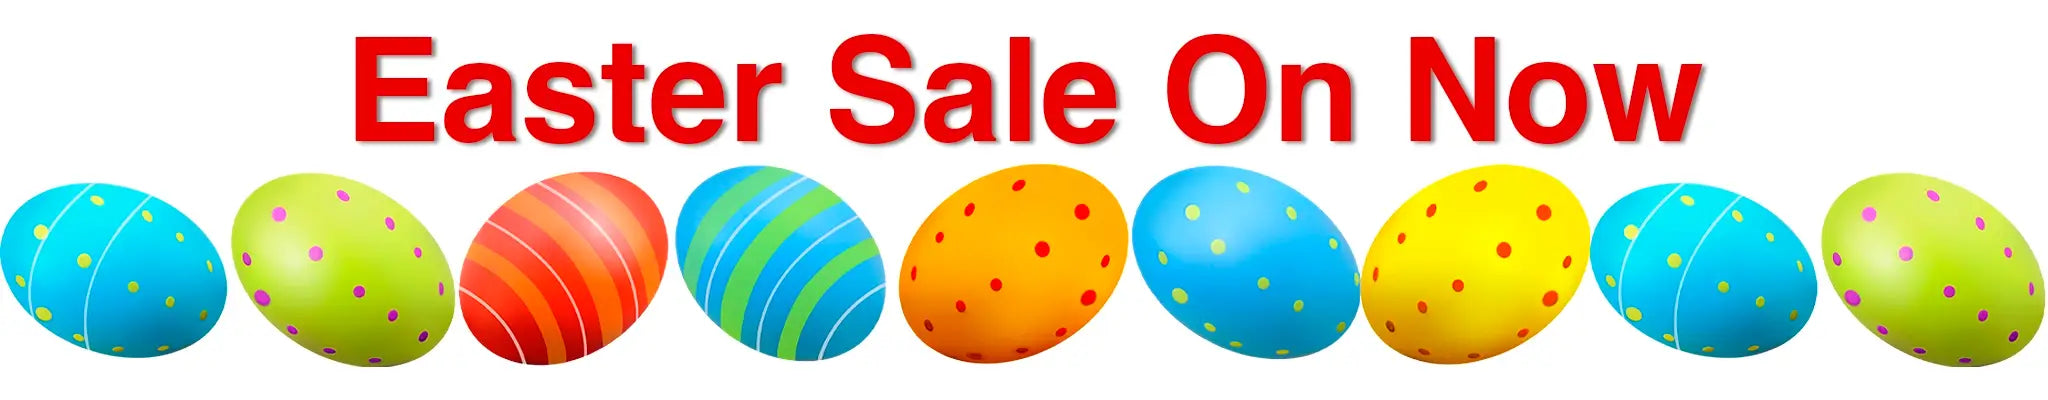 easter sale at seahorse silks - scarves silk shirts tops made in australia